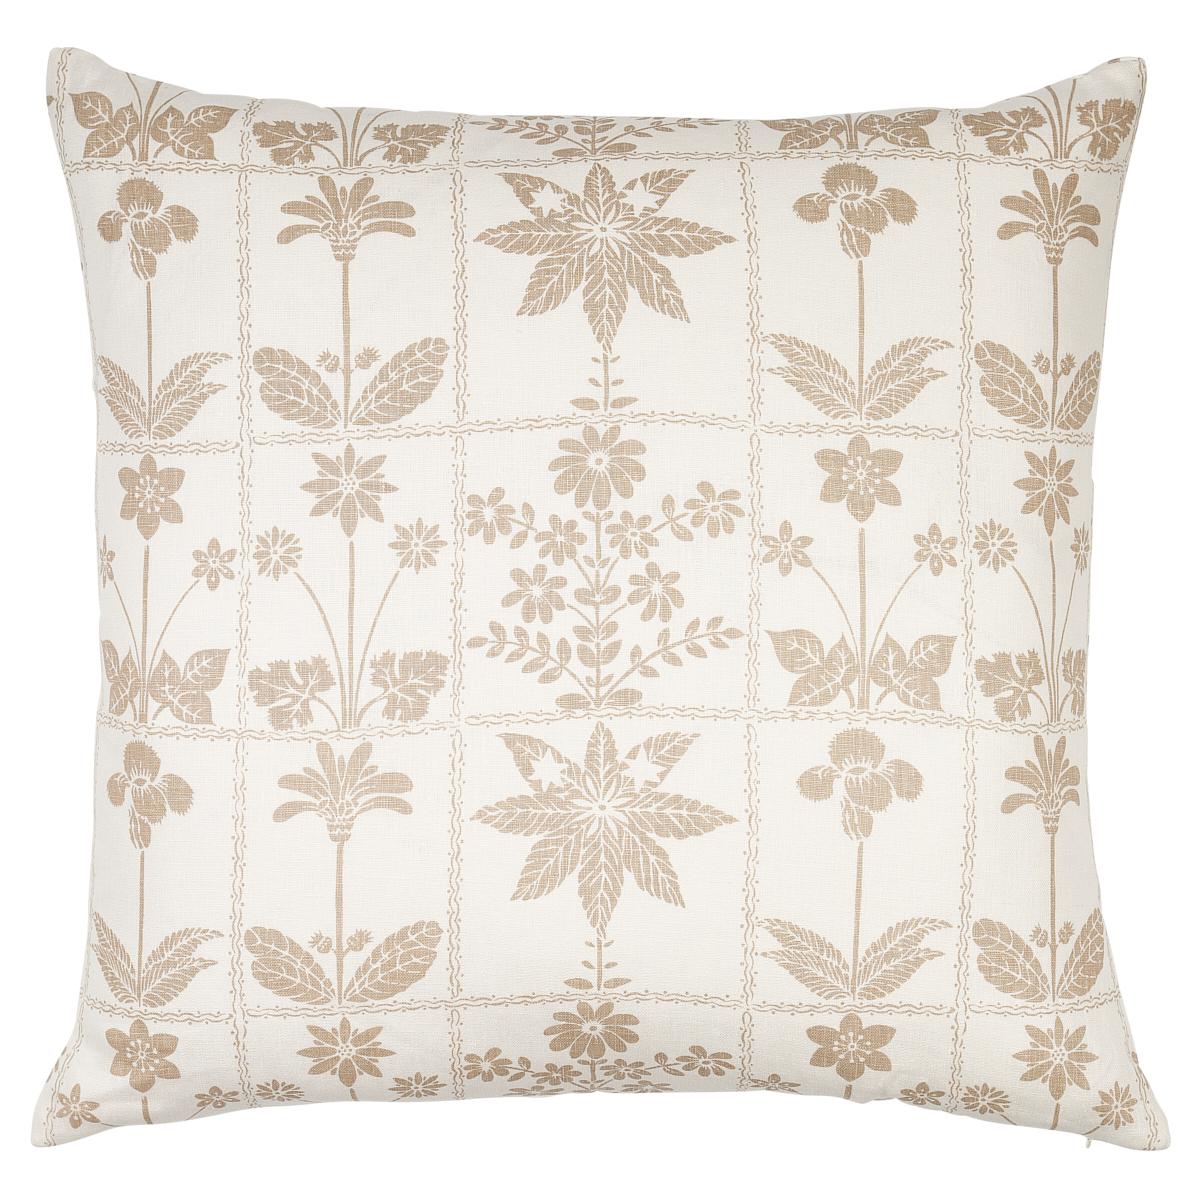 Schuamcher Georgia Wildflowers 22" Pillow in Neutral For Sale